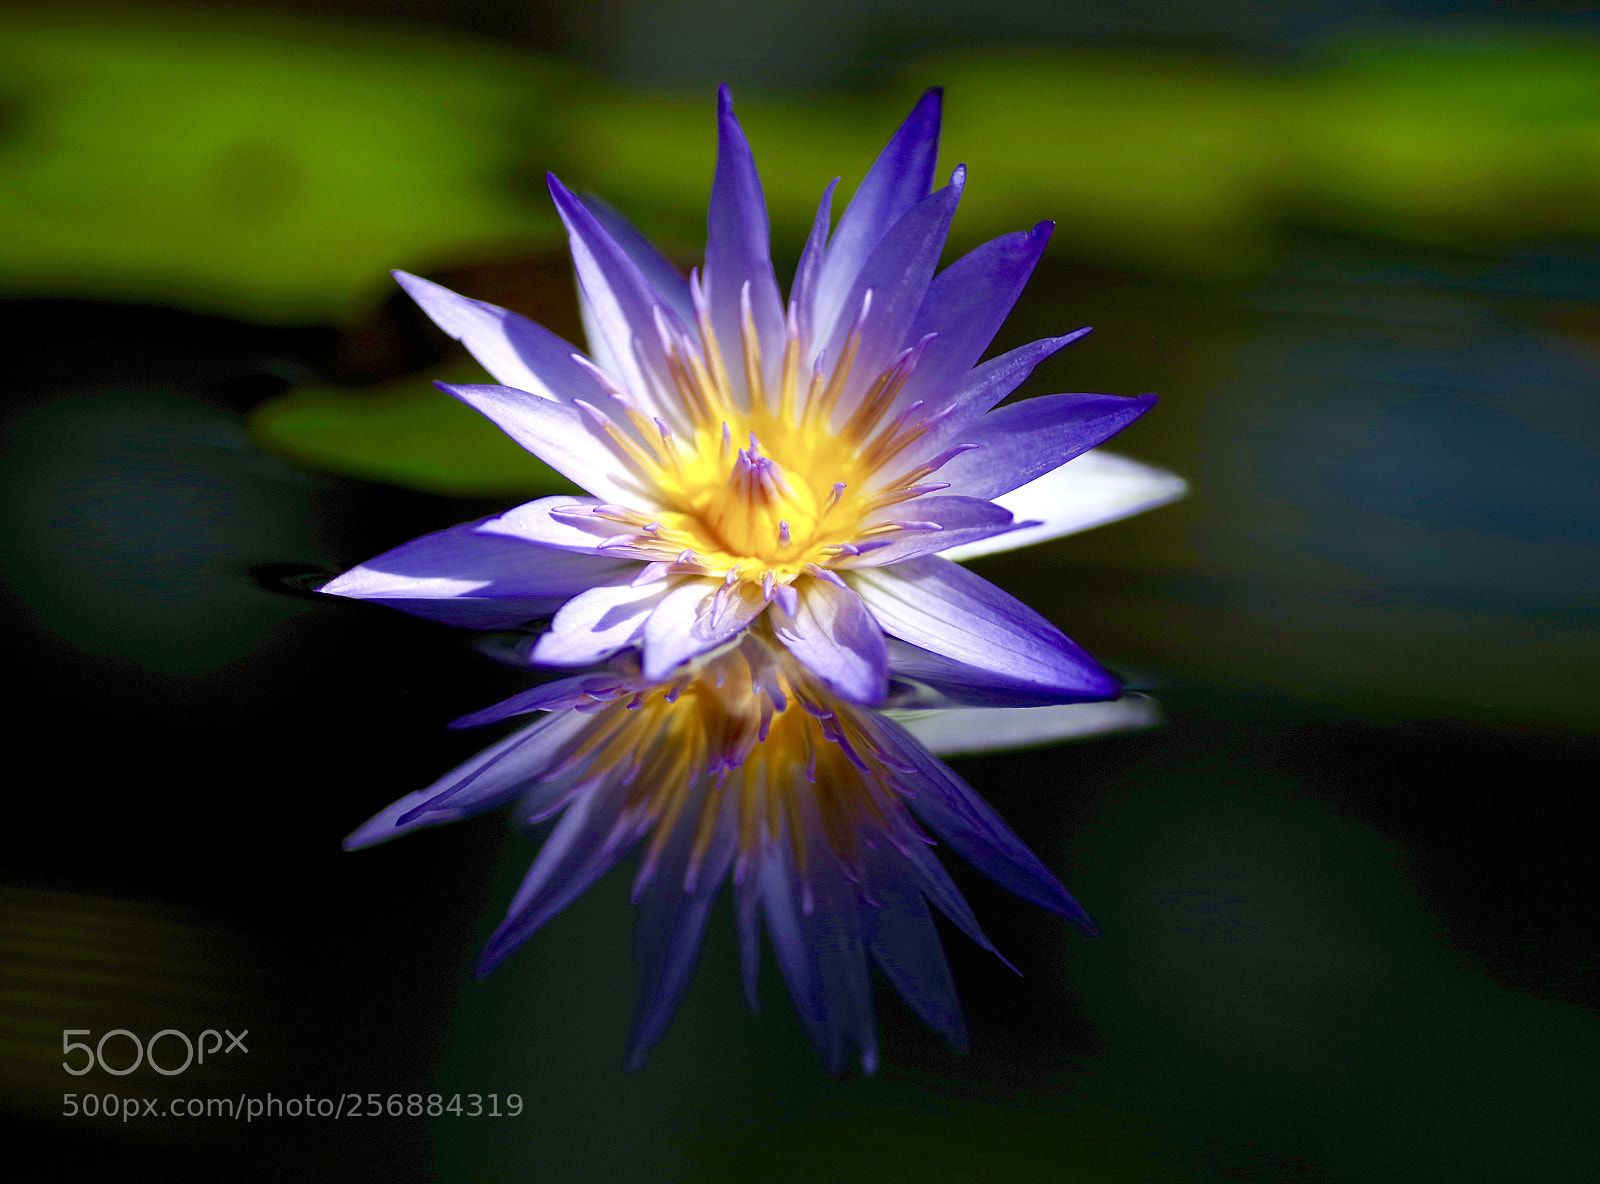 Pentax K-1 sample photo. Water lilly photography